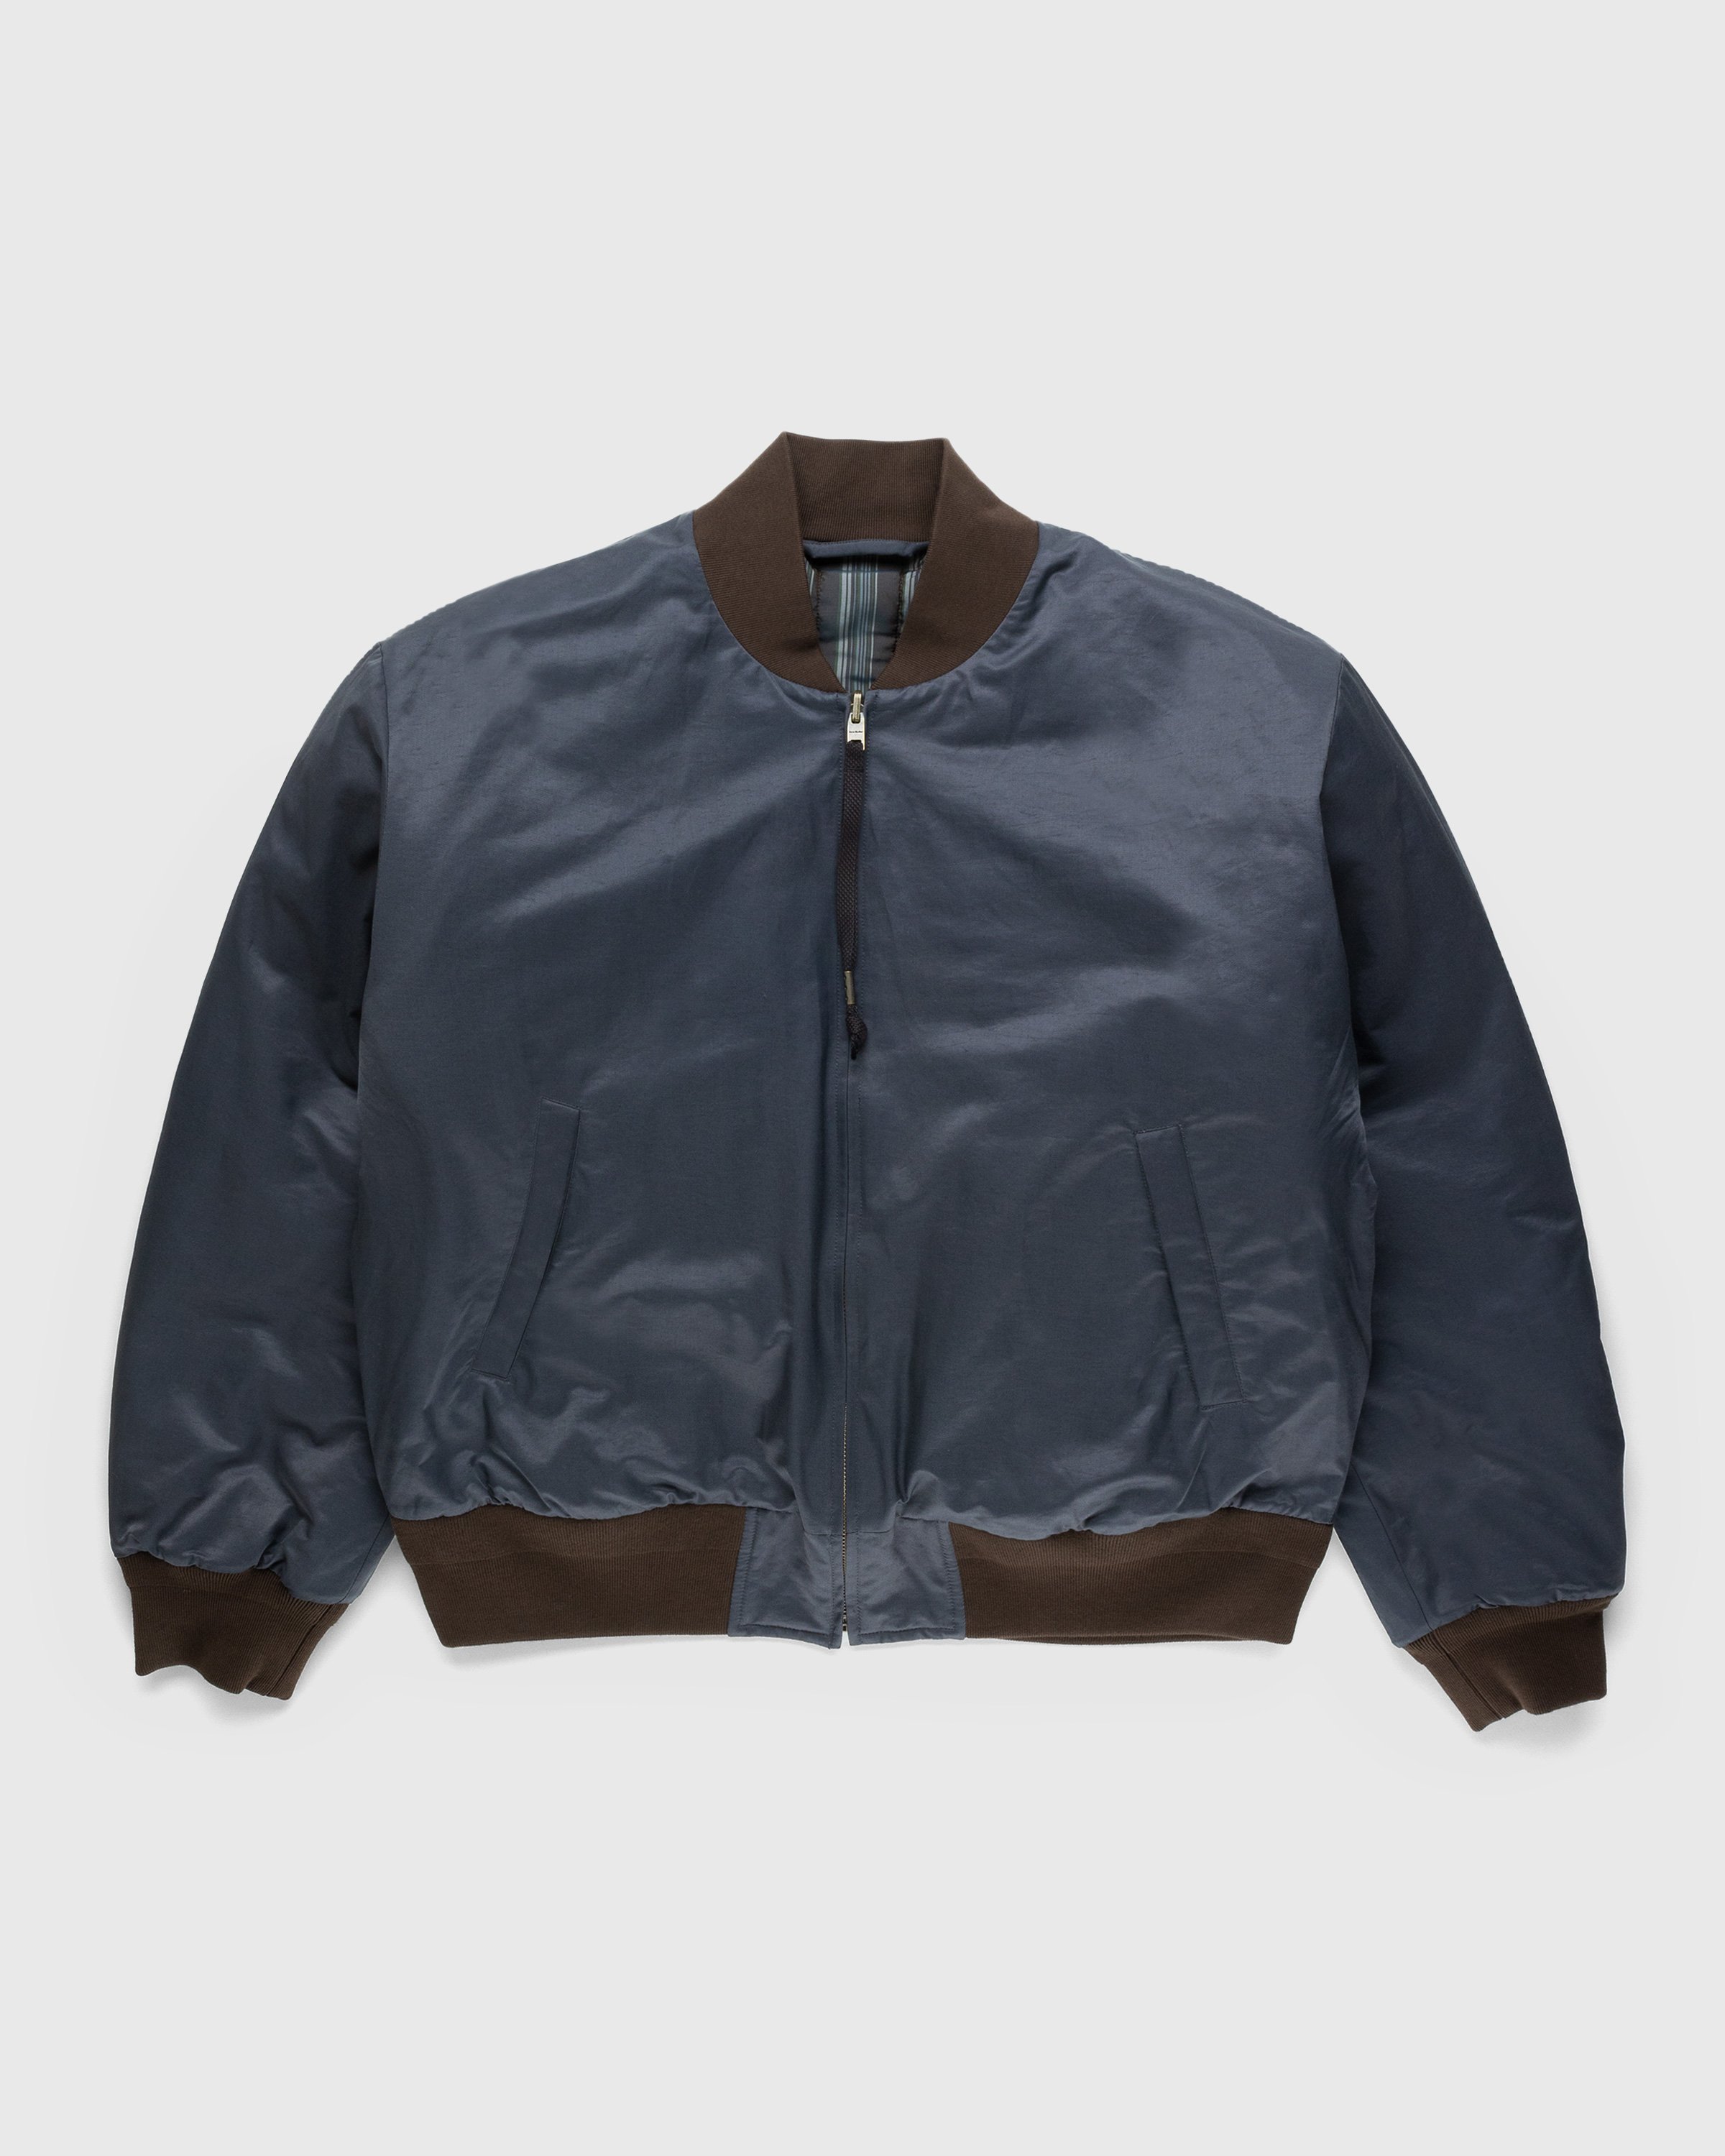 Acne Studios – Reversible Patch Bomber Jacket Anthracite Grey ...